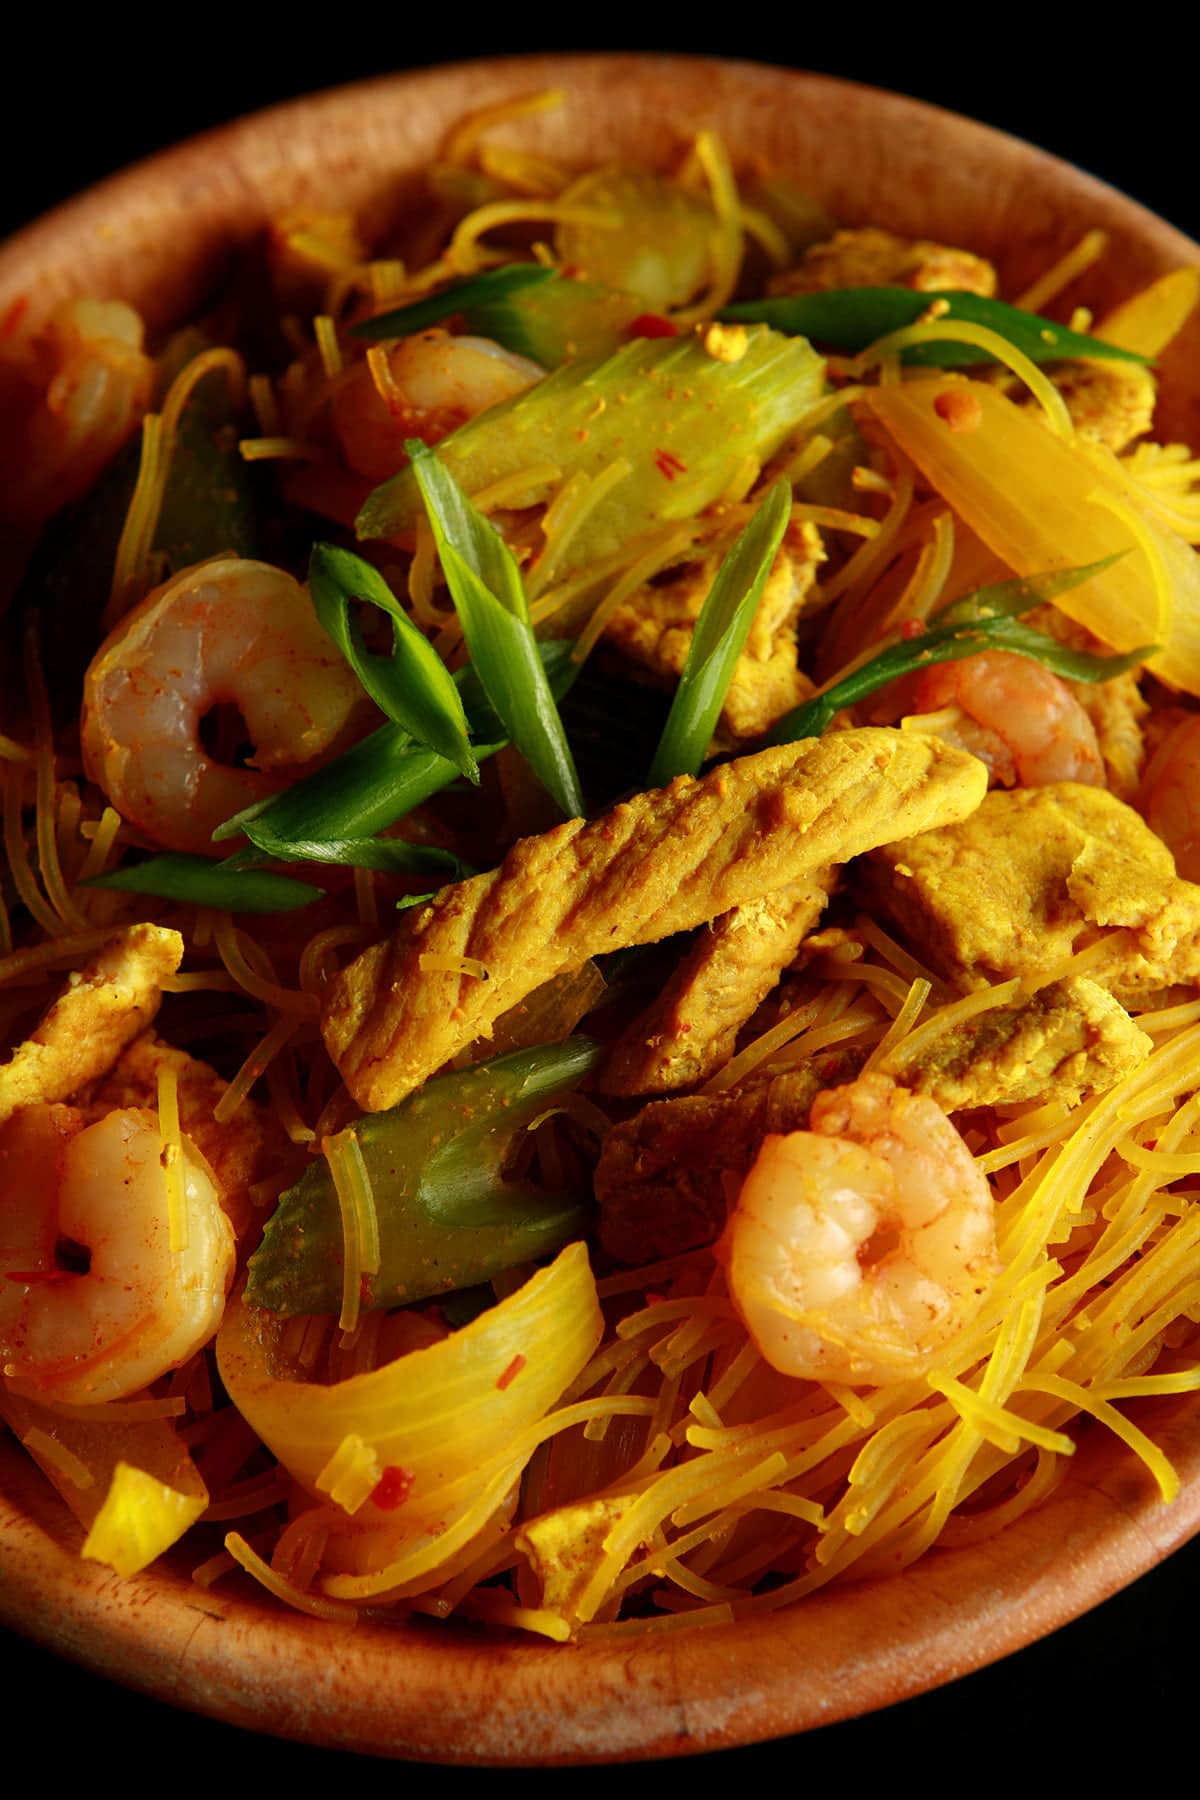 A large bowl of Singapore Mai Fan - curried vermacelli noodles with onion, celery, chicken, and shrimp visible throughout.